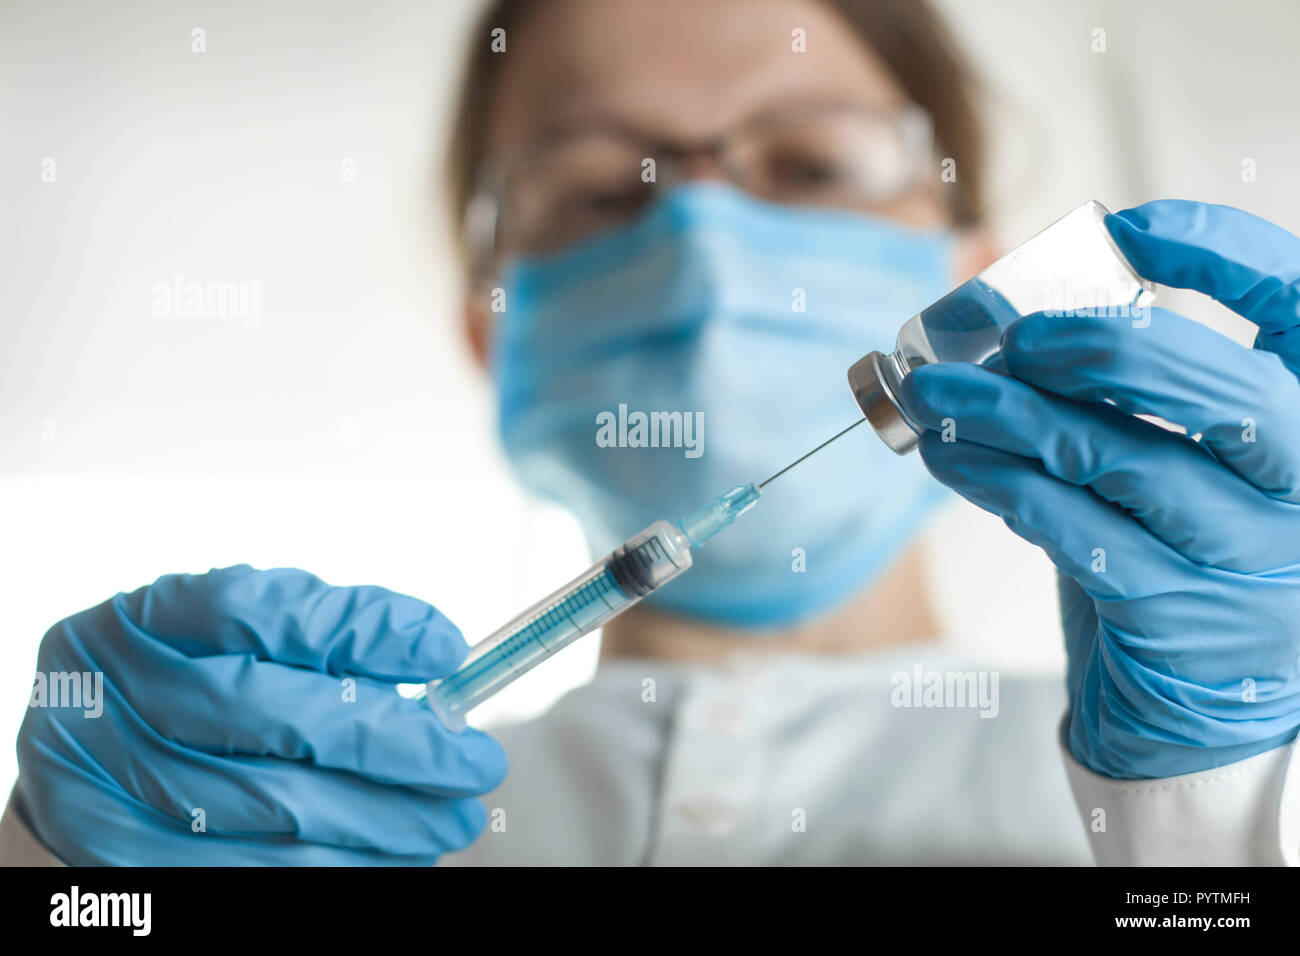 A syringe and a bottle with an injection solution, against the background of a medical worker. The doctor is holding a syringe with vaccination. Stock Photo